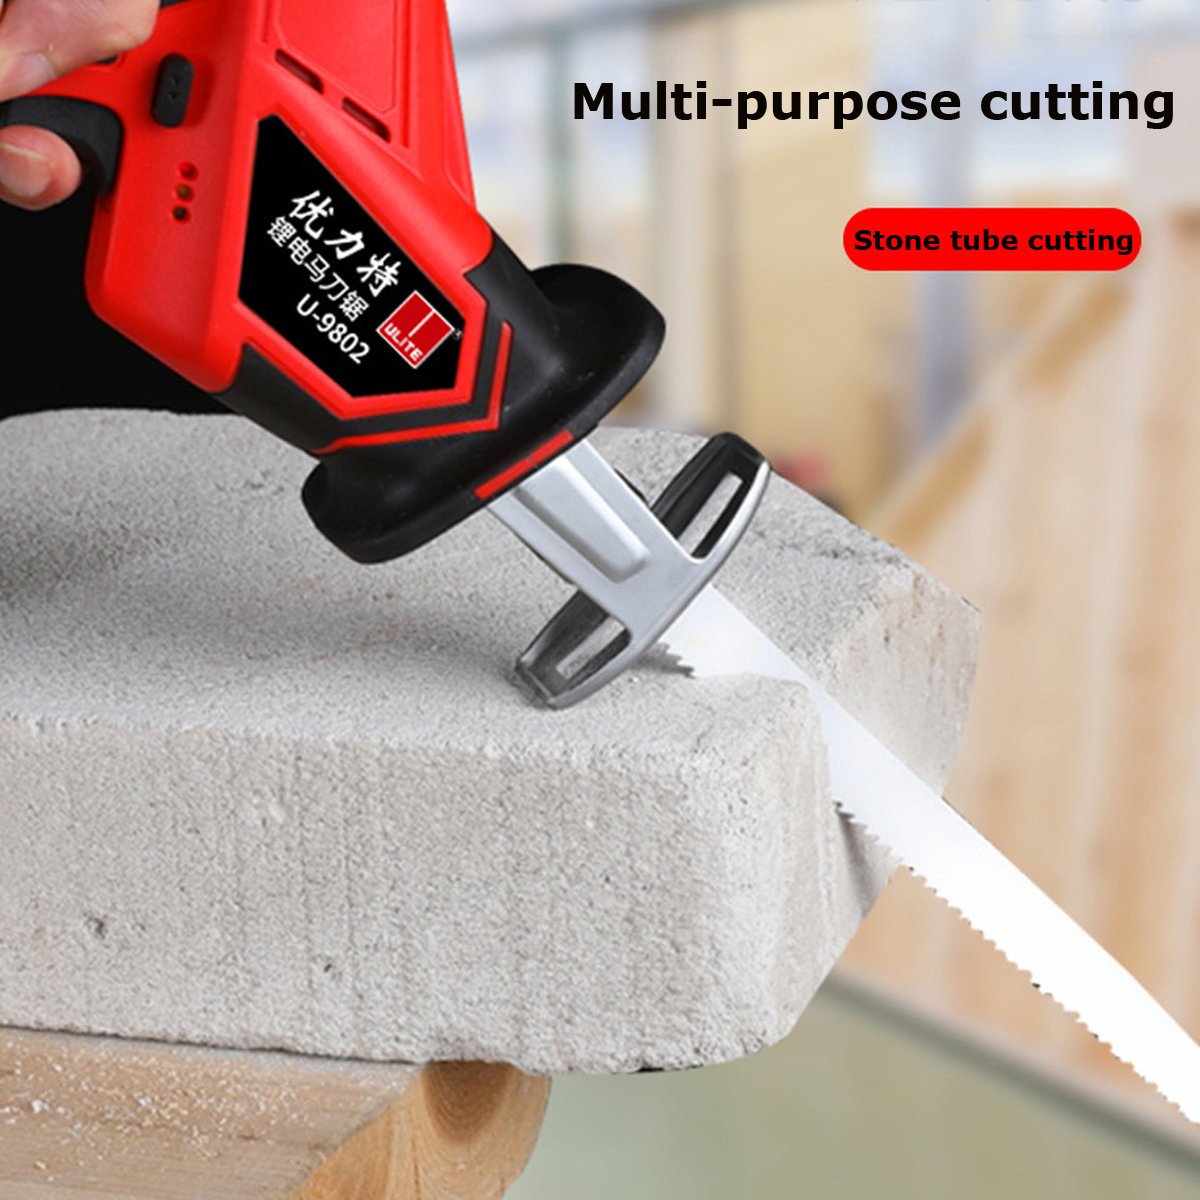 12V Electric Reciprocating Saw Reciprocating Sabre Cutting Pruning Saw Woodworking Metal Saws